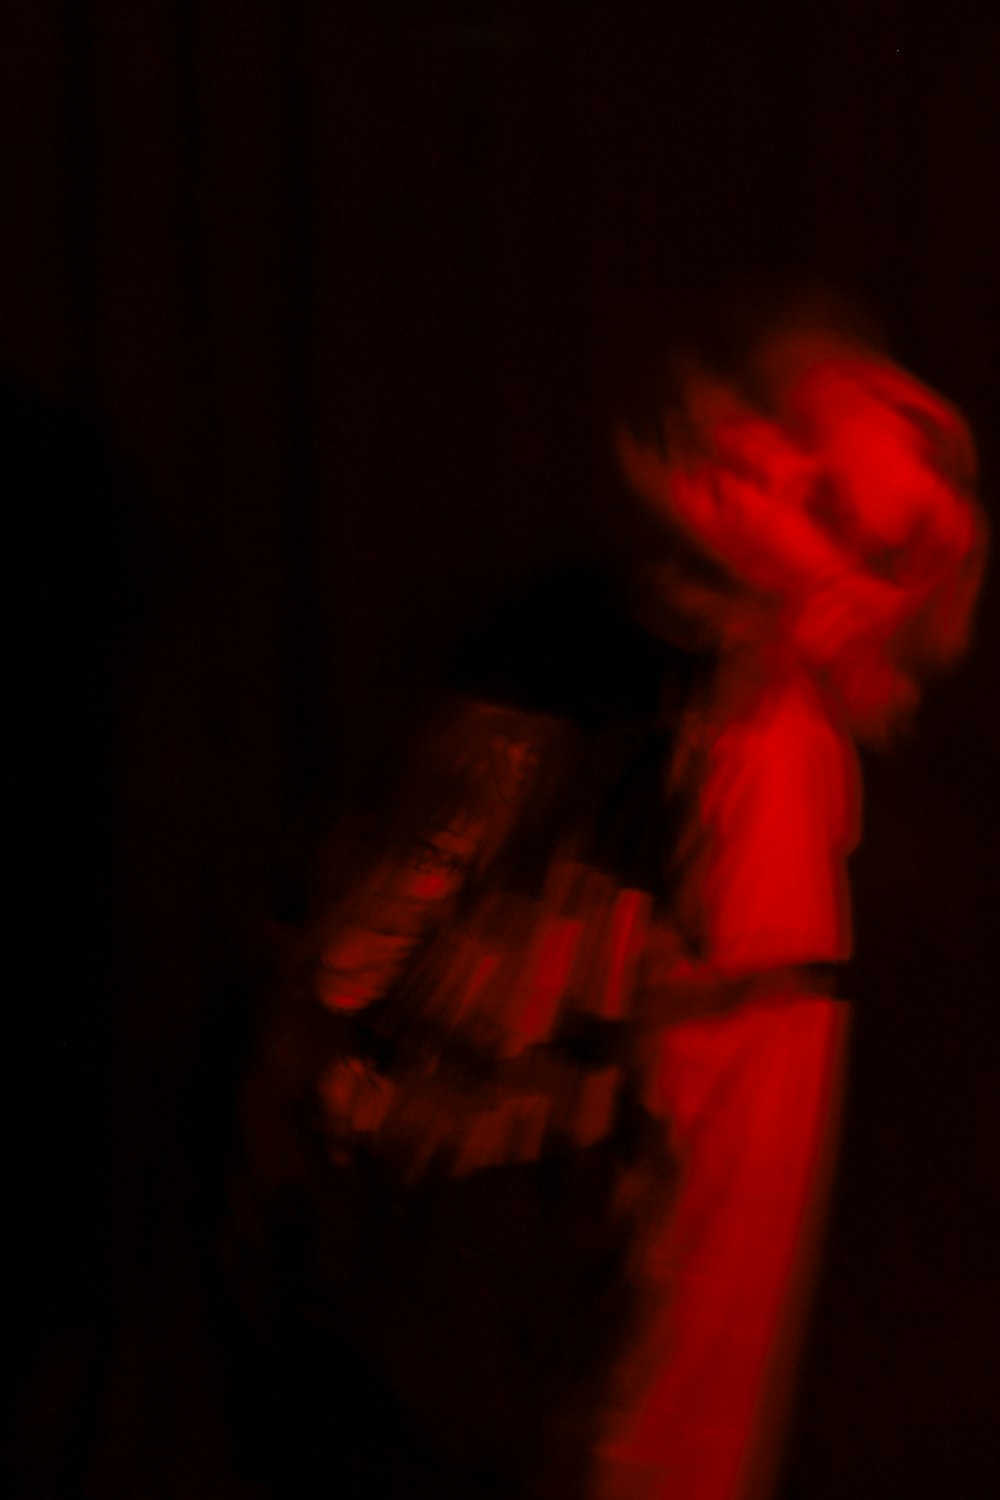 a blurry image of a person with a backpack